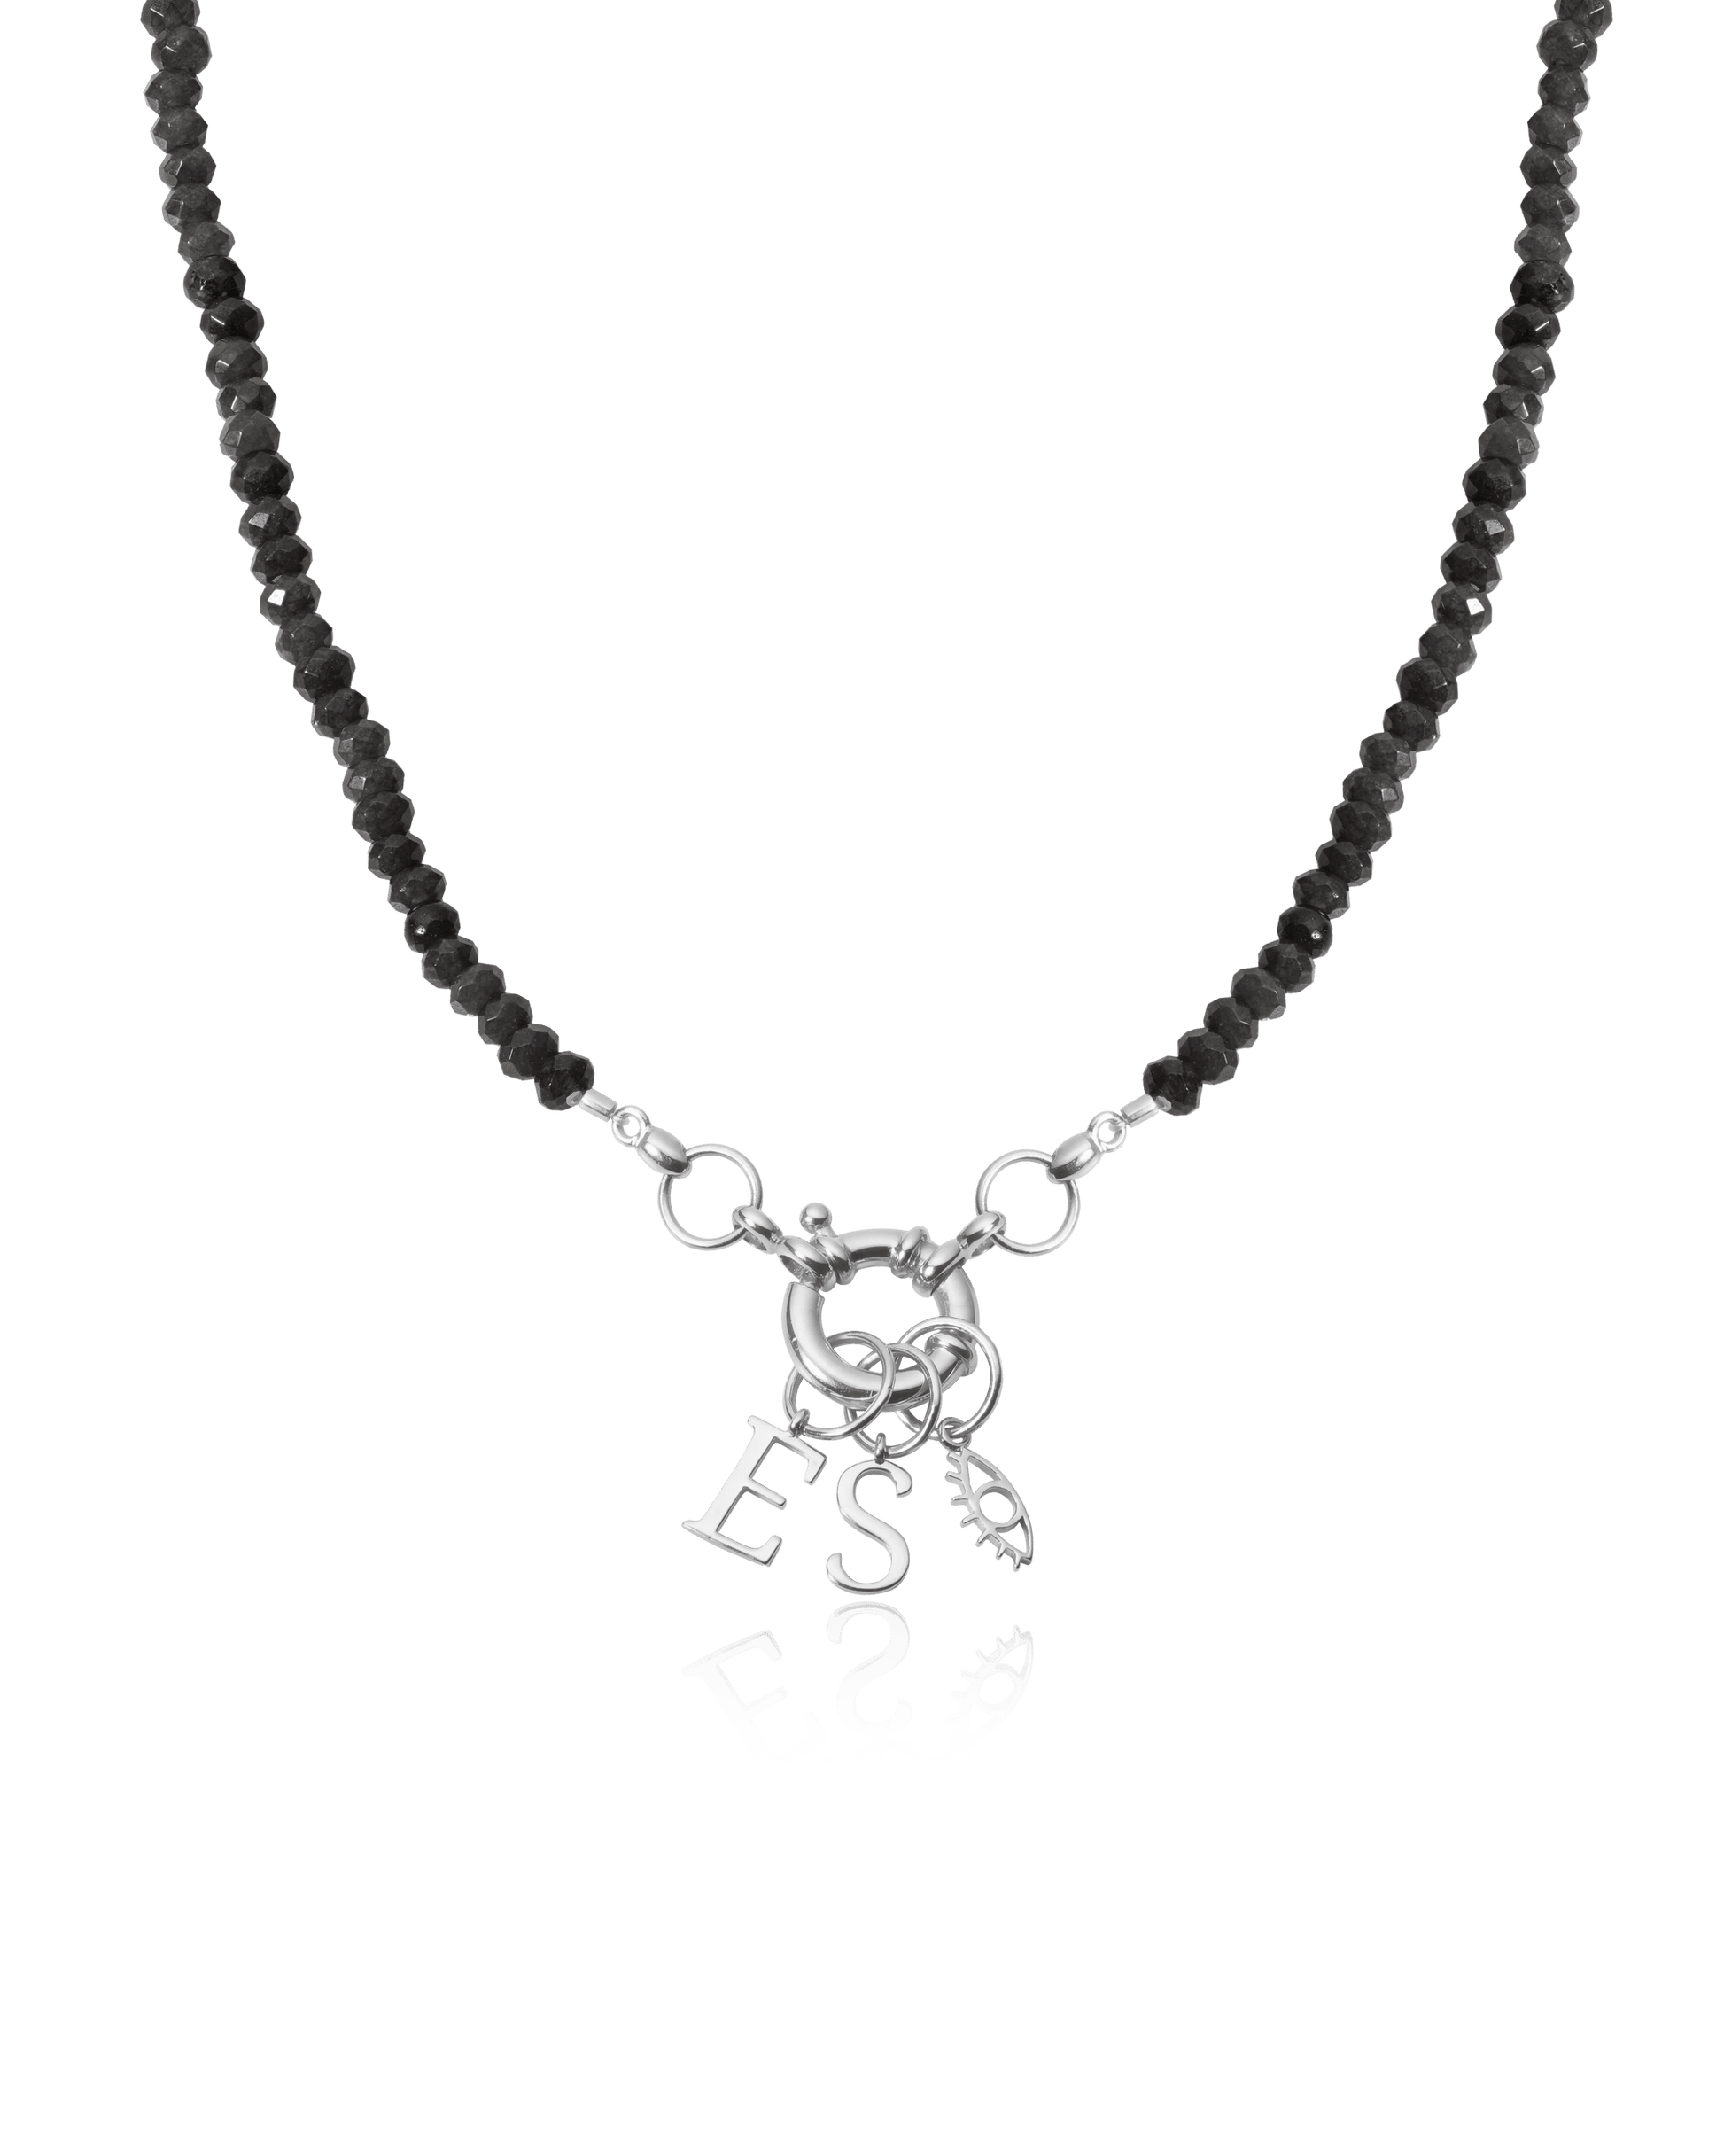 Watermelon Charm Lock Necklace - 925 Sterling Silver Necklaces magal-dev Glass Beads Black Spinnel 1 Charm 16"